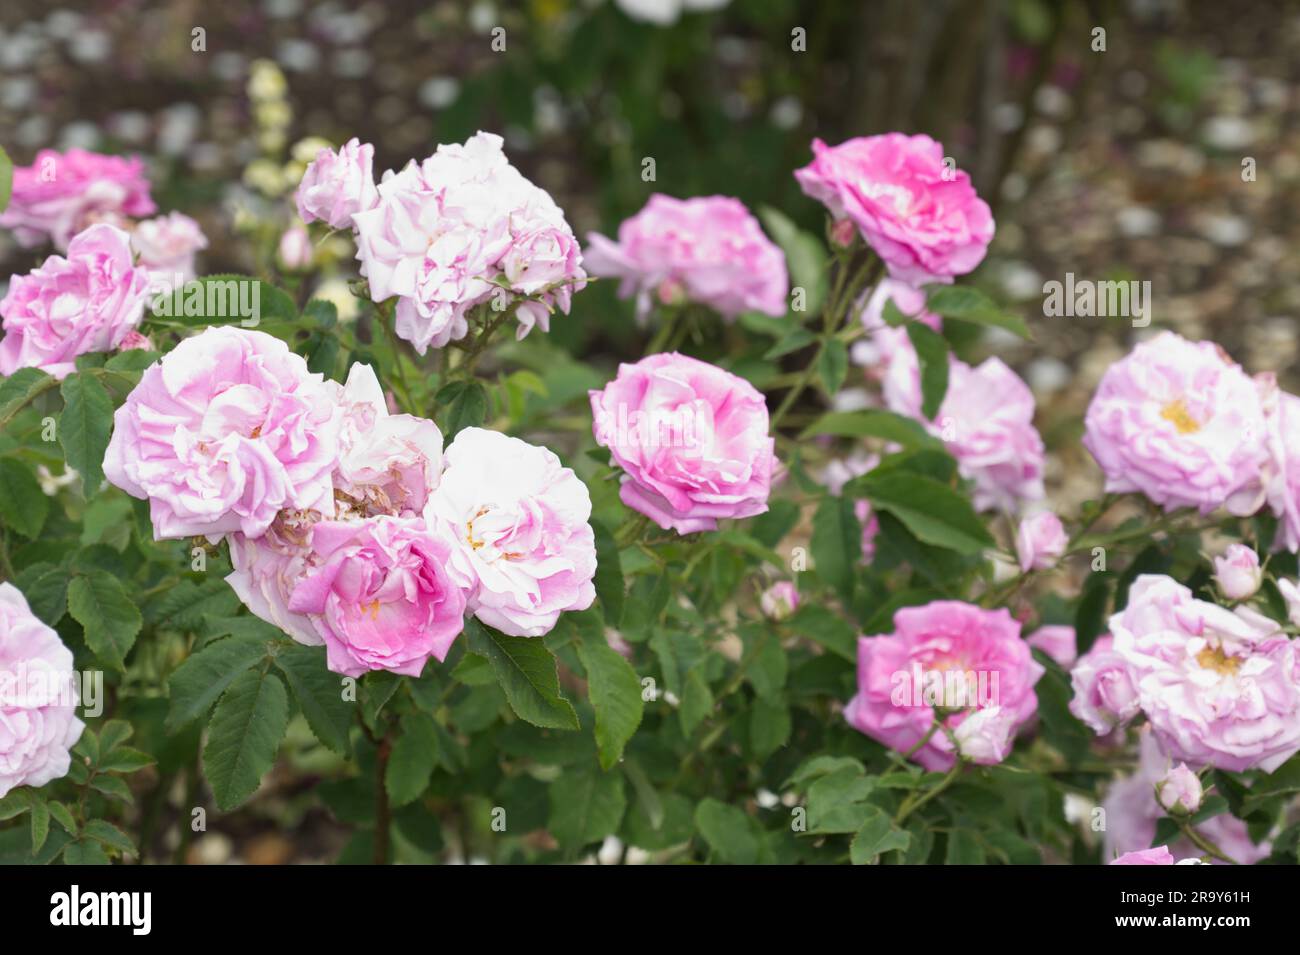 Pale pink double flowers of damask rose Rosa West Green in UK garden June Stock Photo